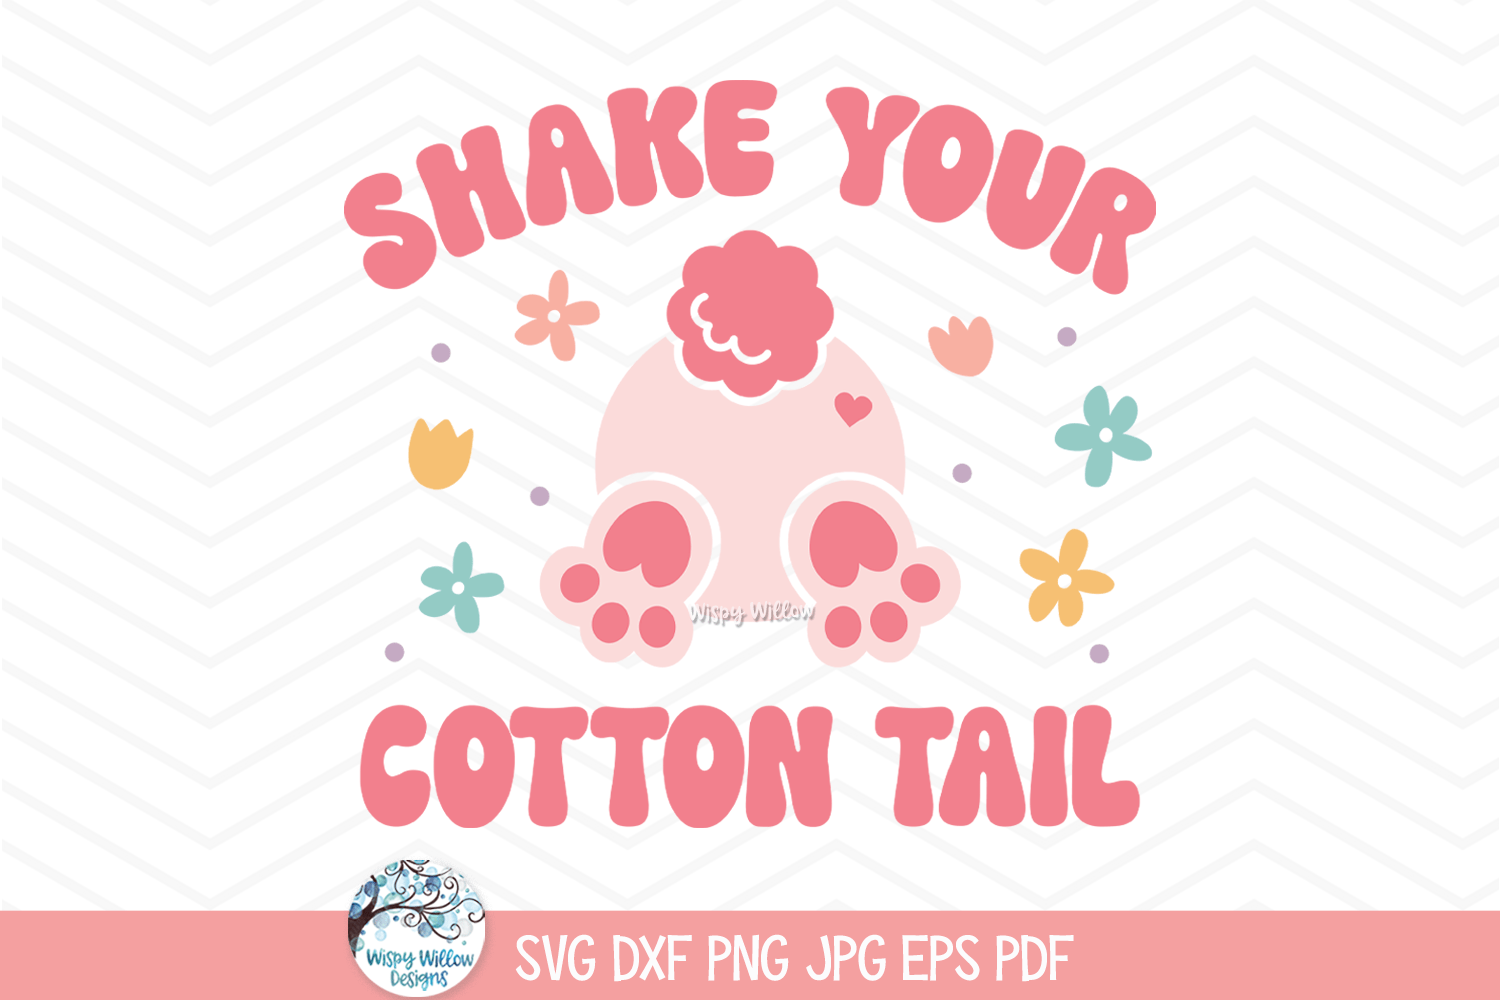 Shake Your Cotton Tail SVG | Colorful Spring Tee Wispy Willow Designs Company